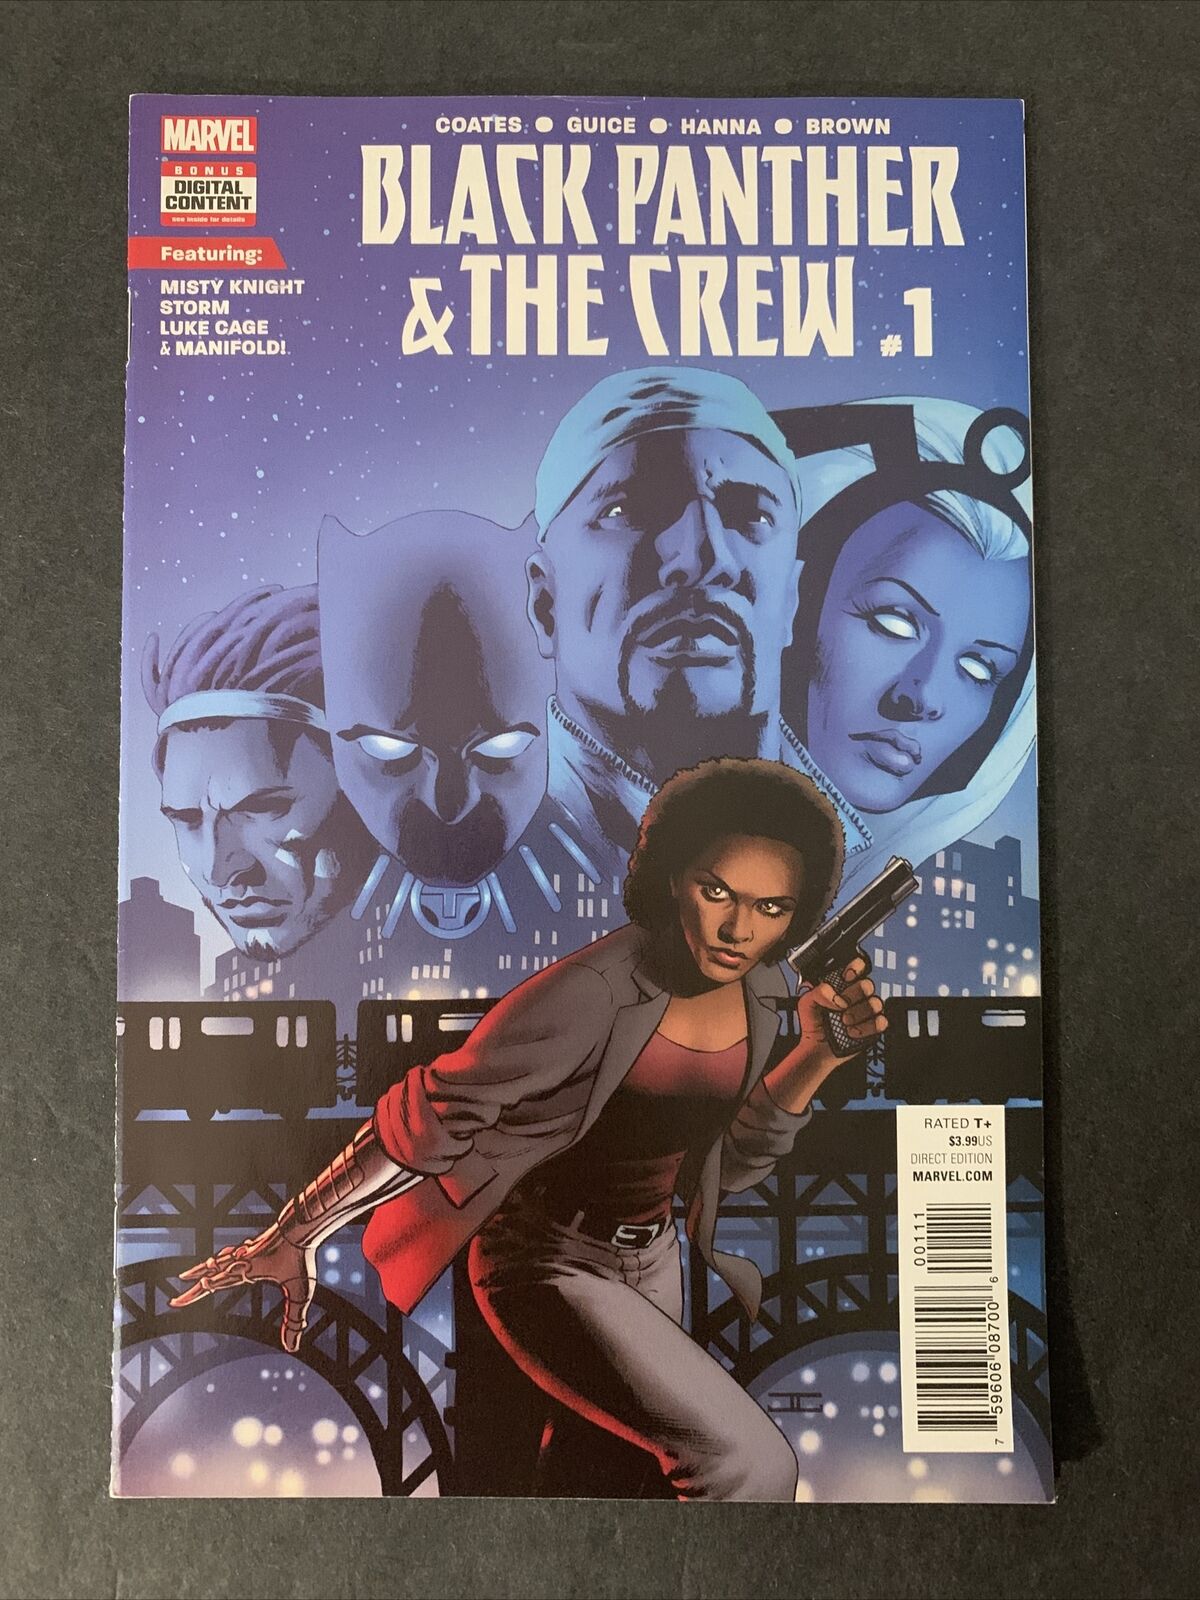 BLACK PANTHER AND THE CREW # 1 MARVEL COMICS 2017 TA-NEHISI COATES VF+